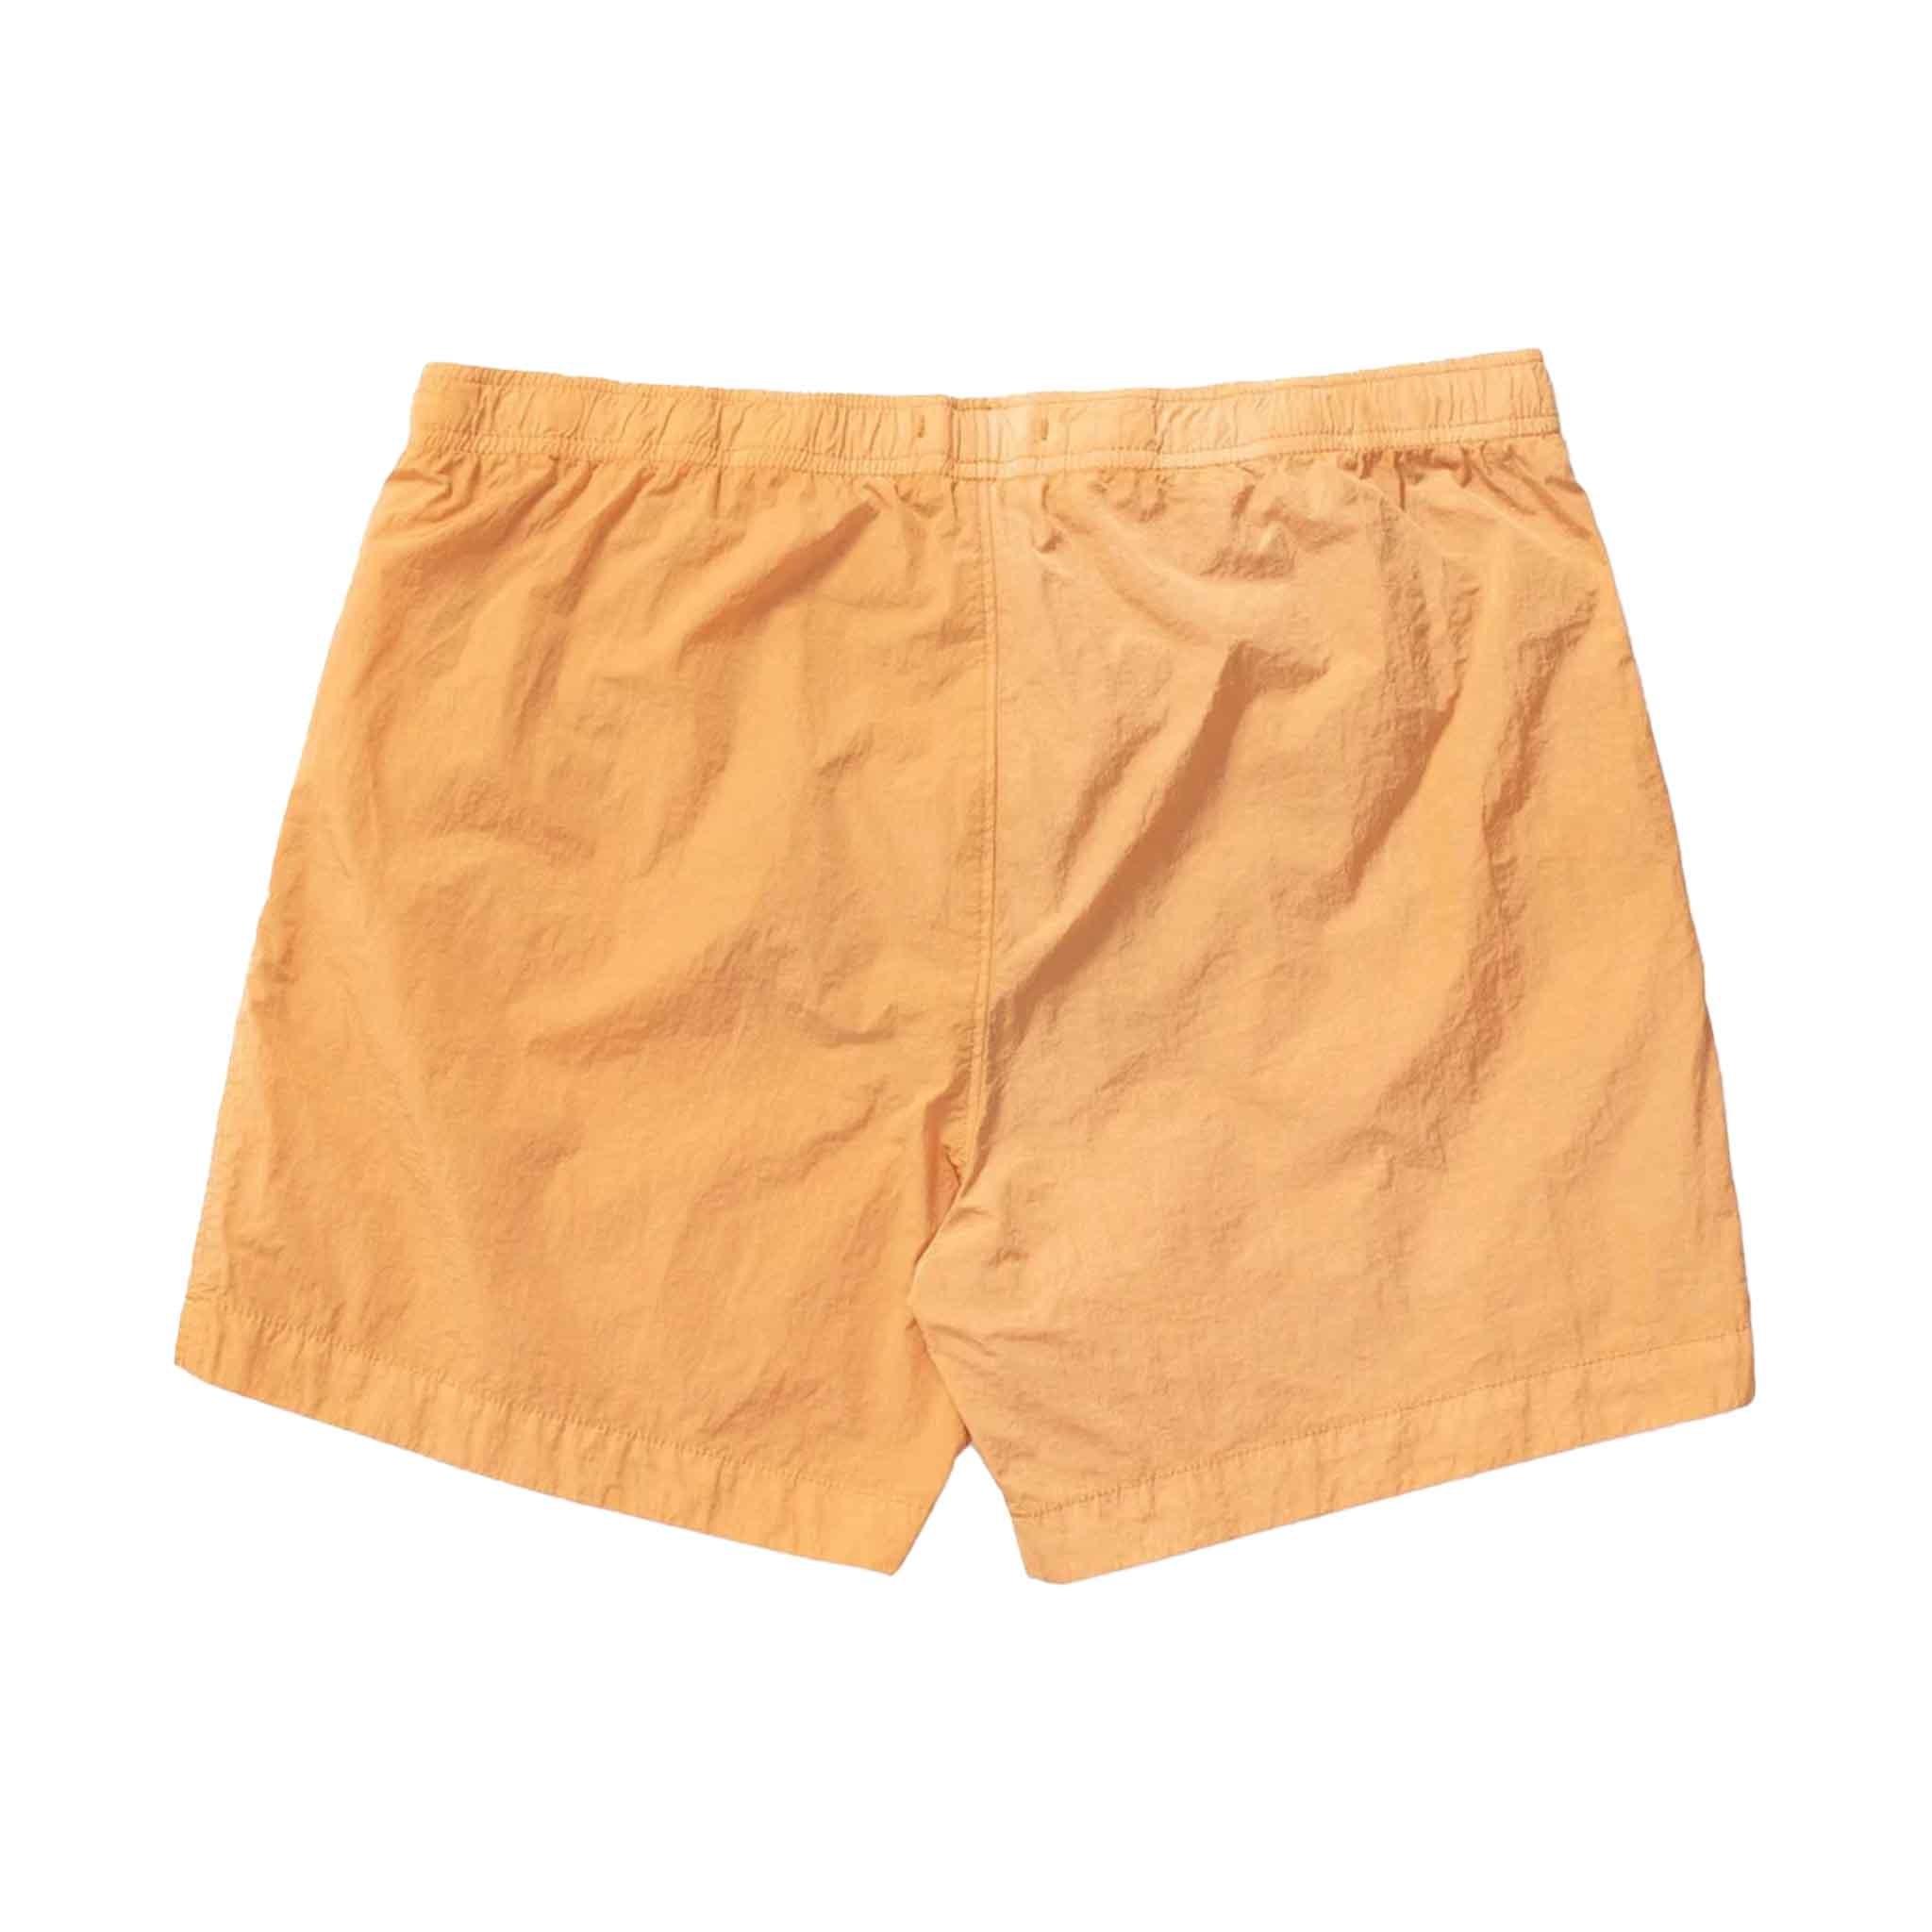 C.P. Company Eco-Chrome-R Swimshorts in Pastry Shell- Orange